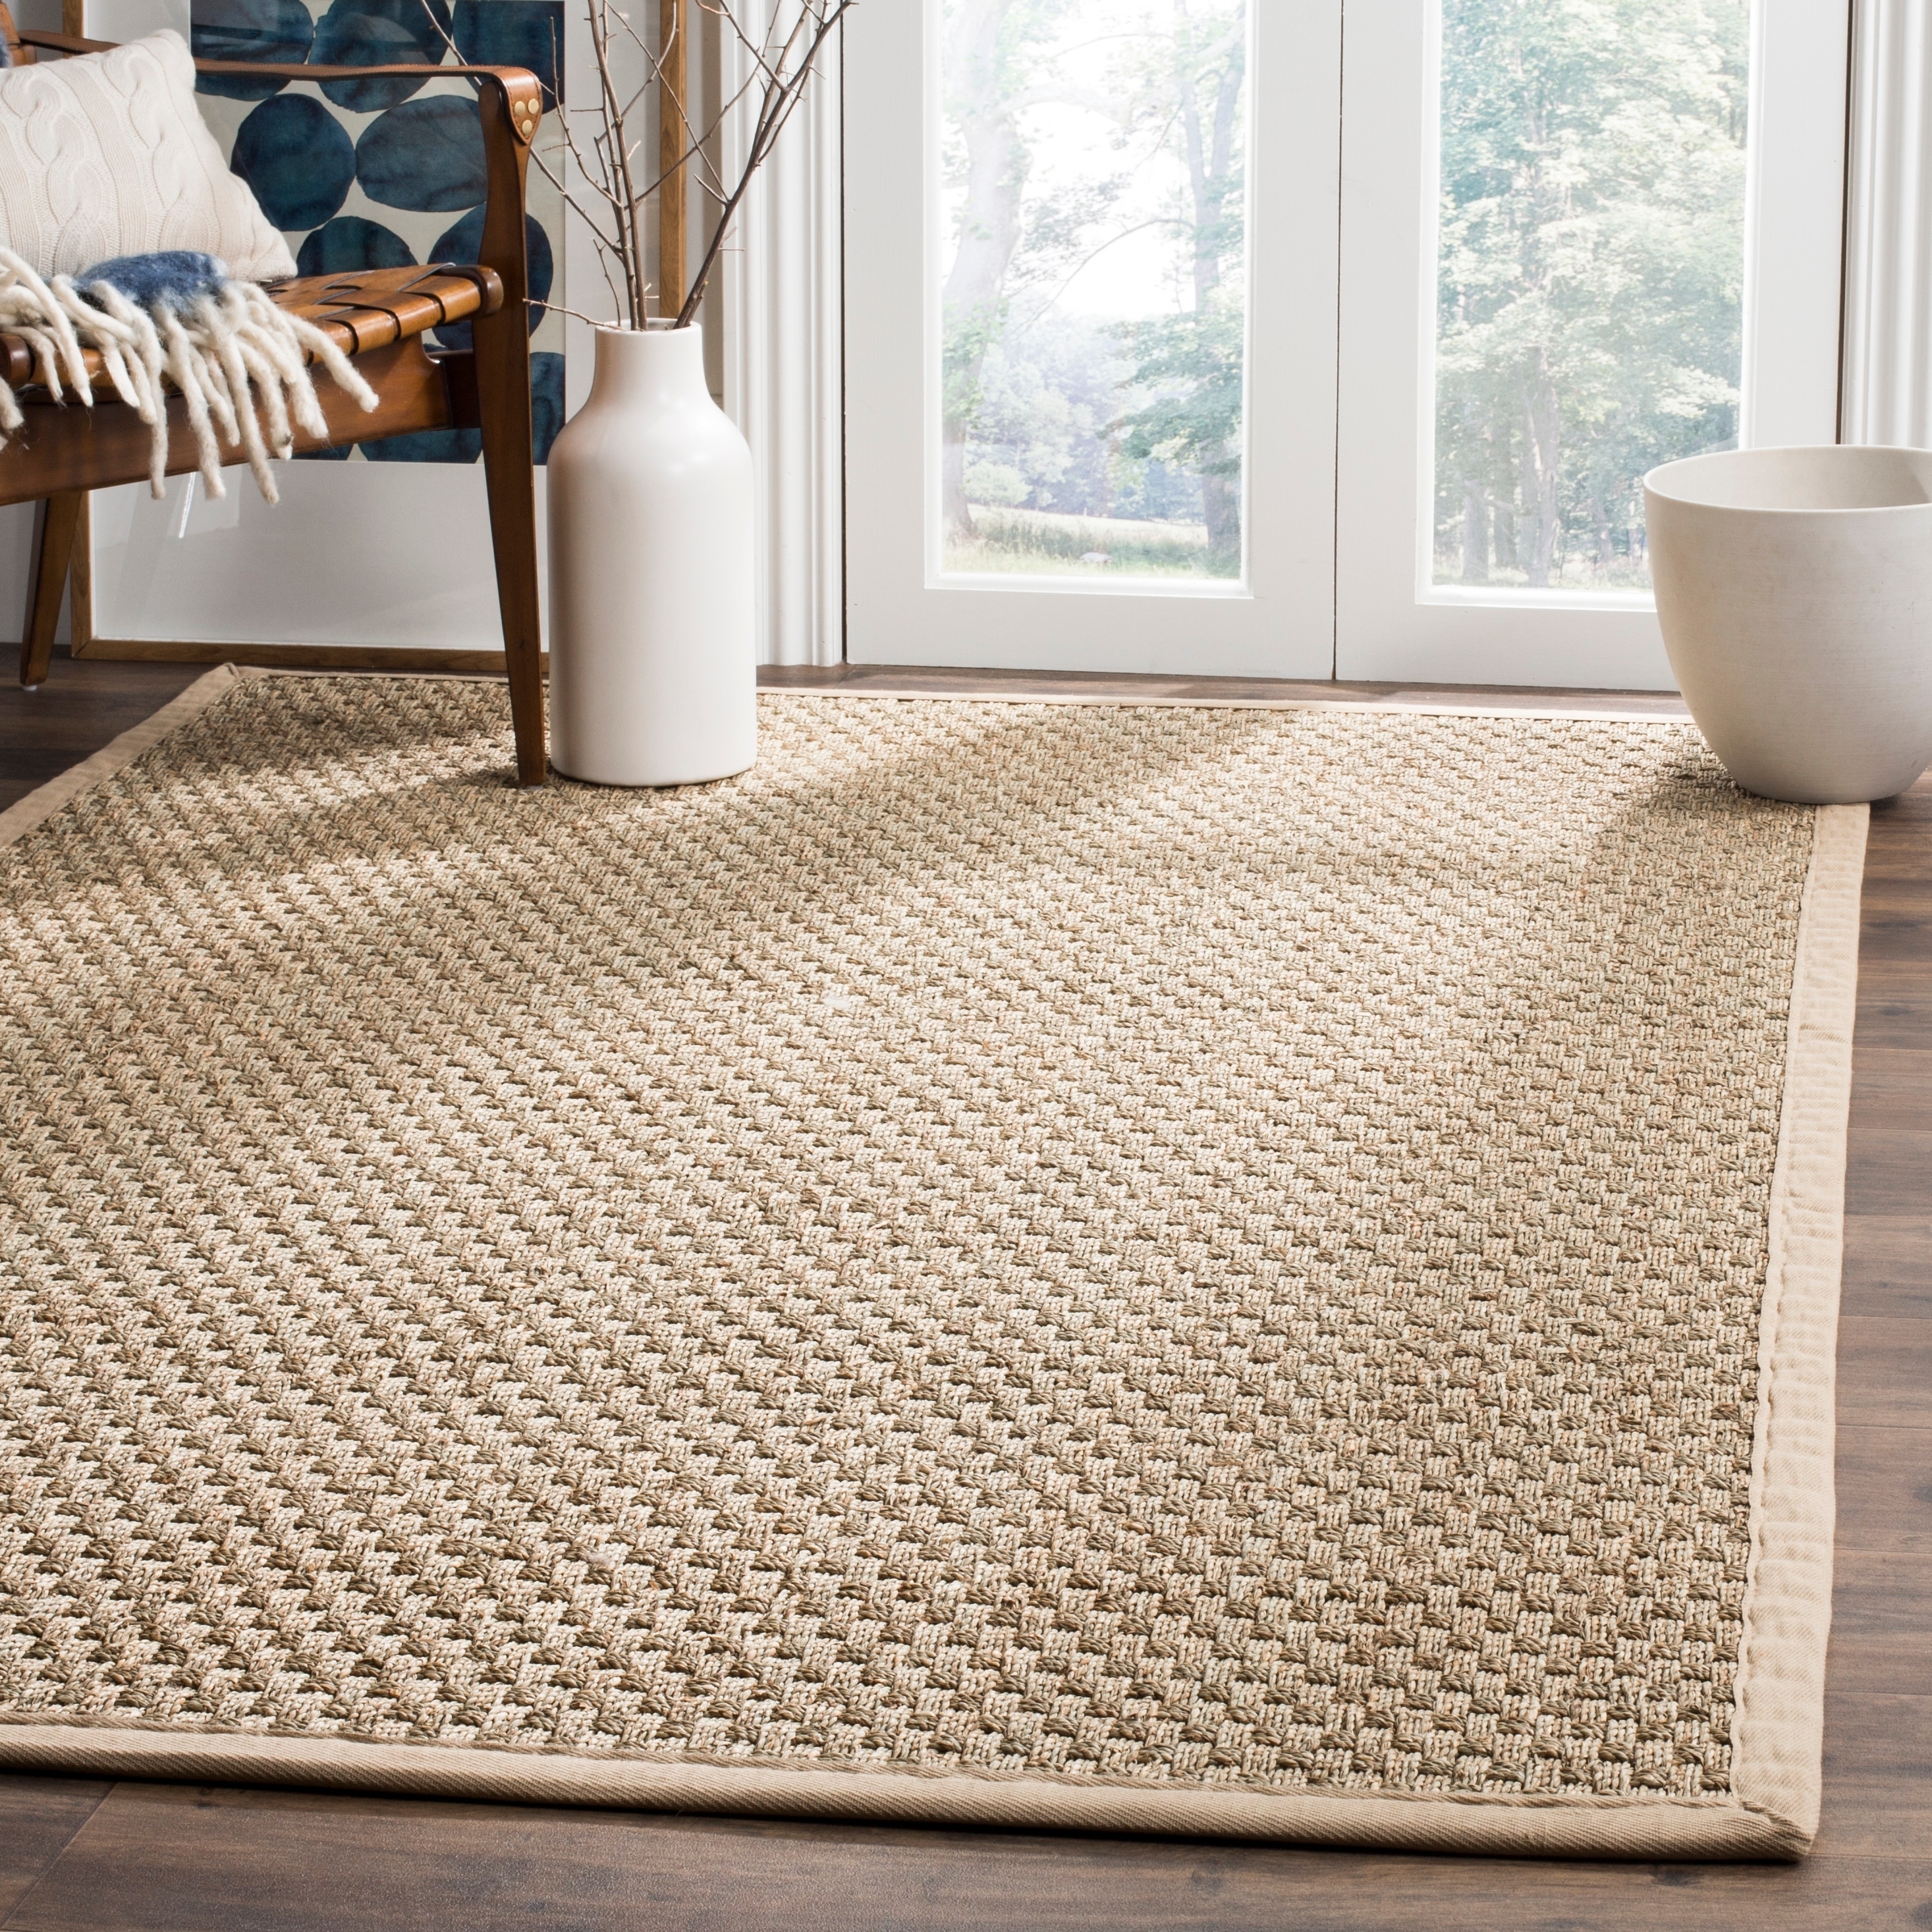 Hand woven Sisal Natural/ Beige Seagrass Rug (8 X 10)